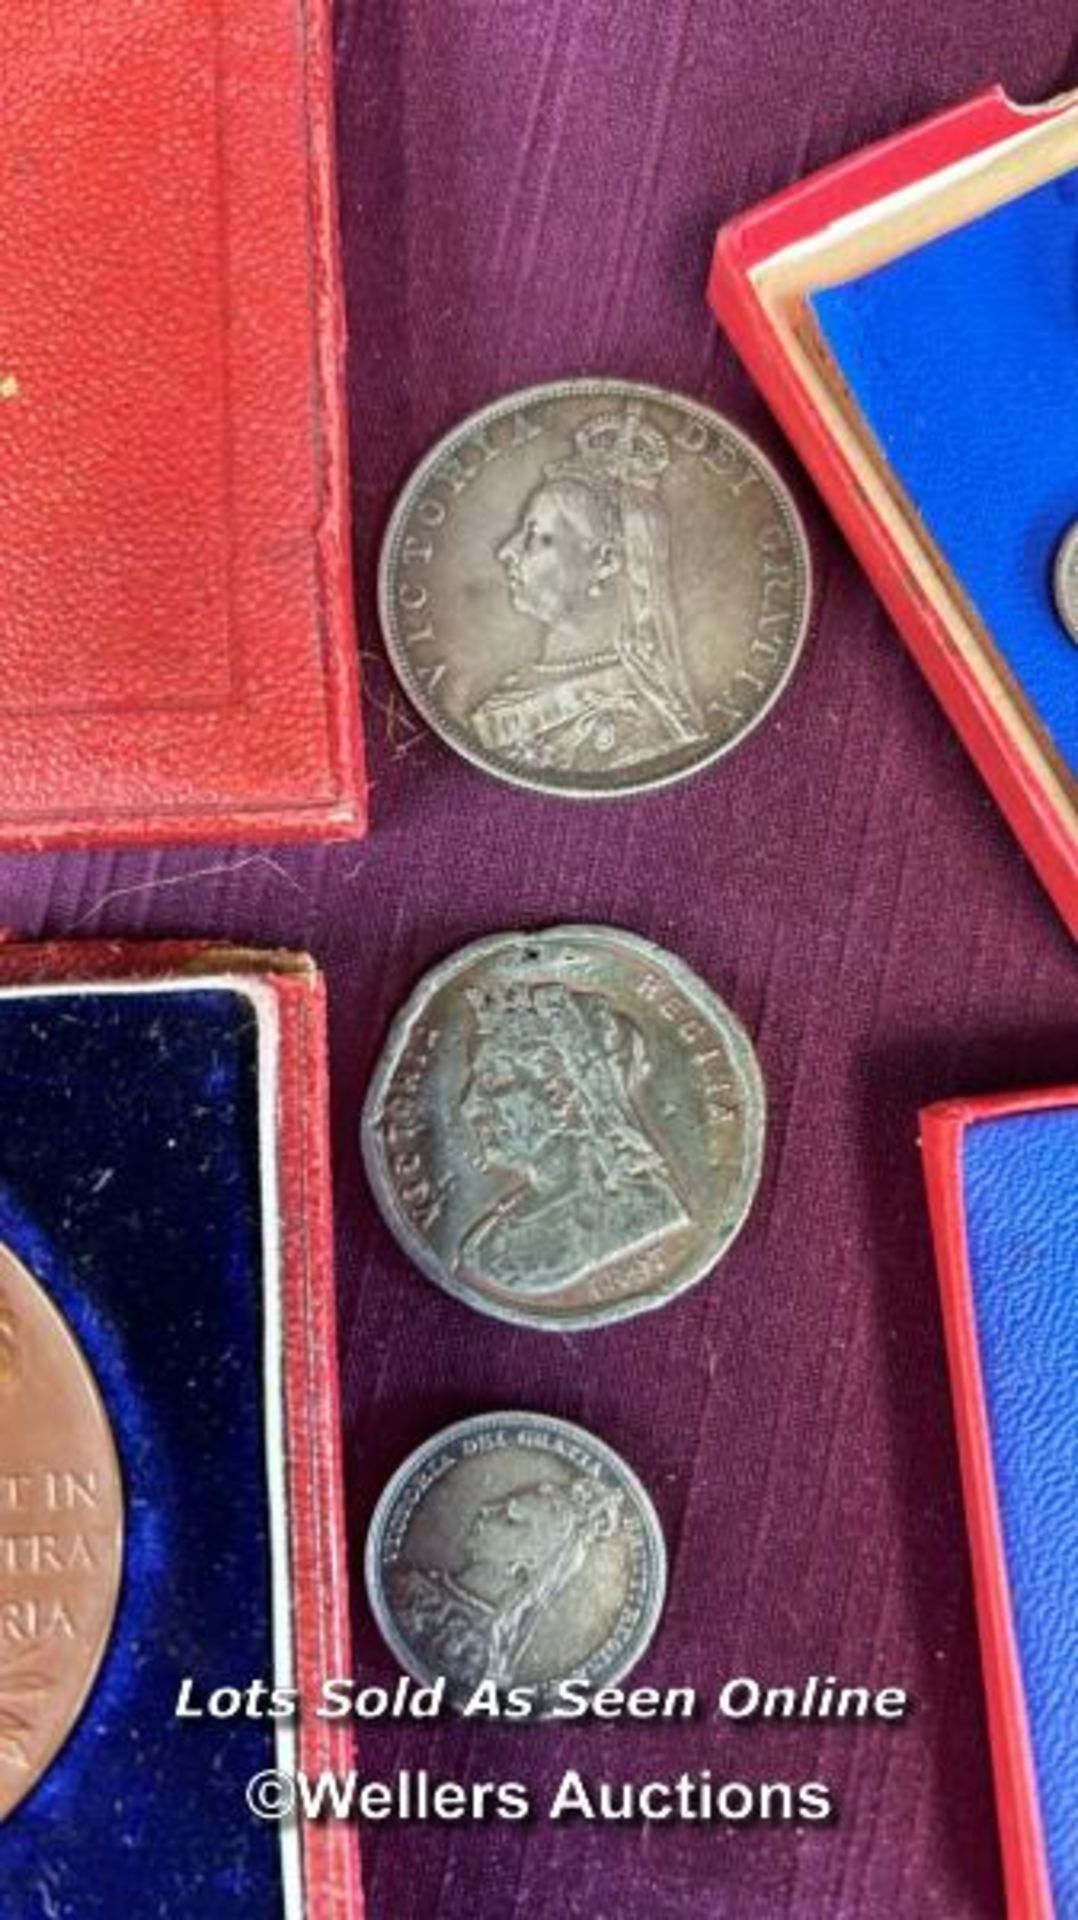 COLLECTION OF MAINLY QUEEN VICTORIA COINS INCLUDING A 1837-1897 COMMEMORATIVE BRONZE COIN - Image 3 of 4